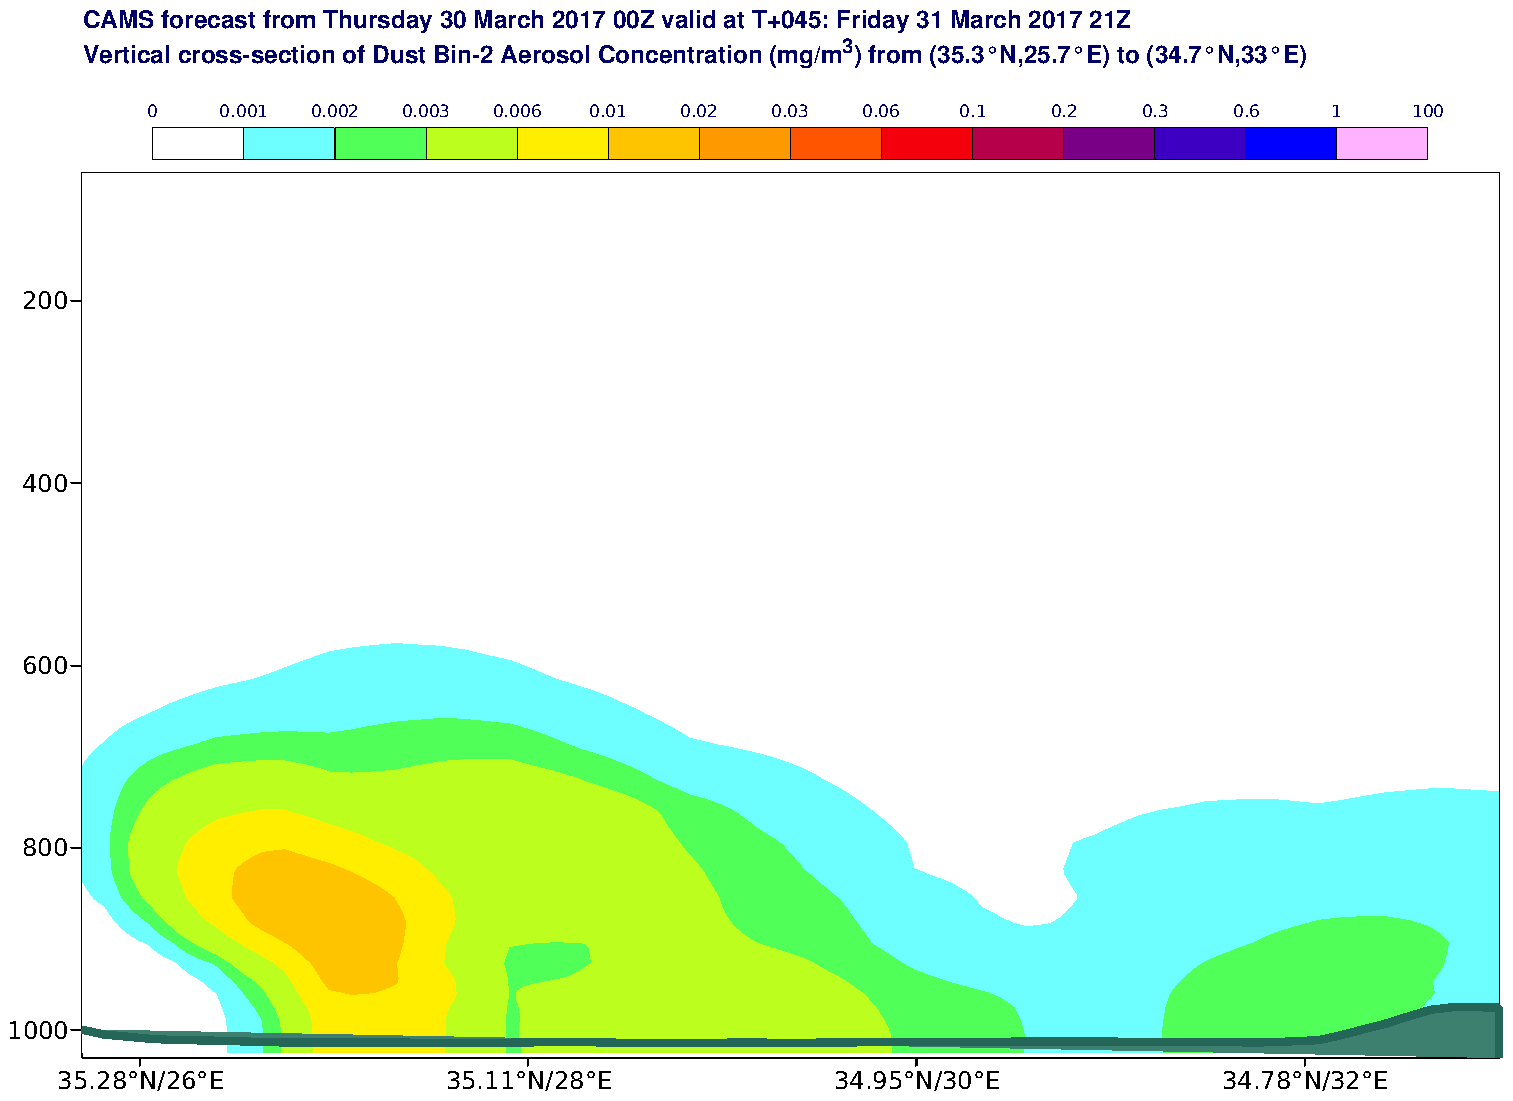 Vertical cross-section of Dust Bin-2 Aerosol Concentration (mg/m3) valid at T45 - 2017-03-31 21:00